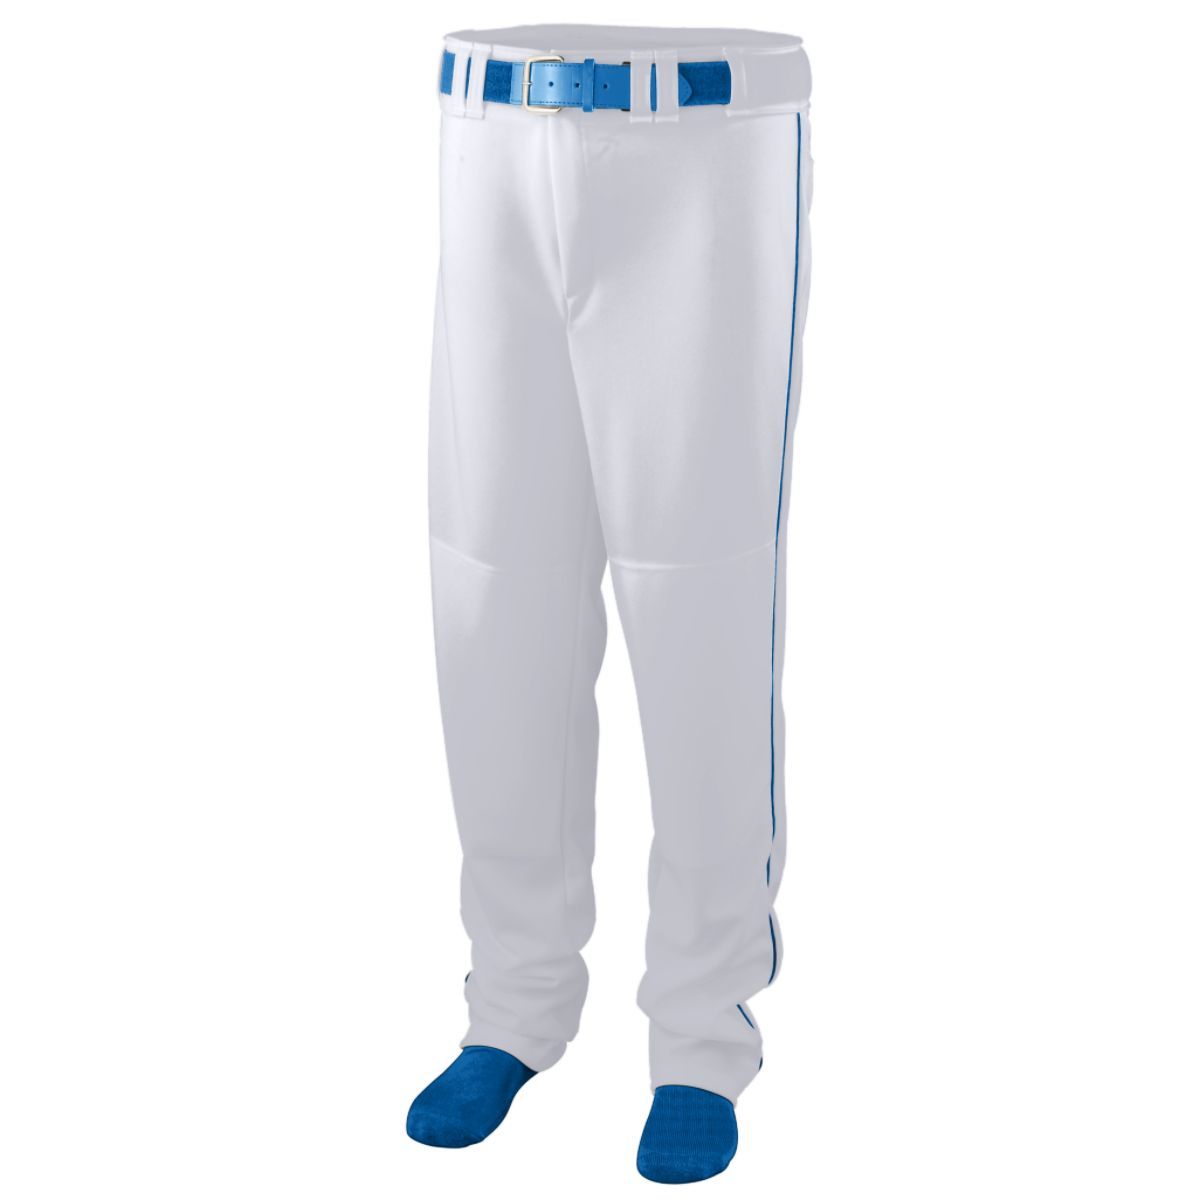 Augusta Sportswear Youth Series Baseball/Softball Pant With Piping in White/Royal  -Part of the Youth, Youth-Pants, Pants, Augusta-Products, Baseball, All-Sports, All-Sports-1 product lines at KanaleyCreations.com